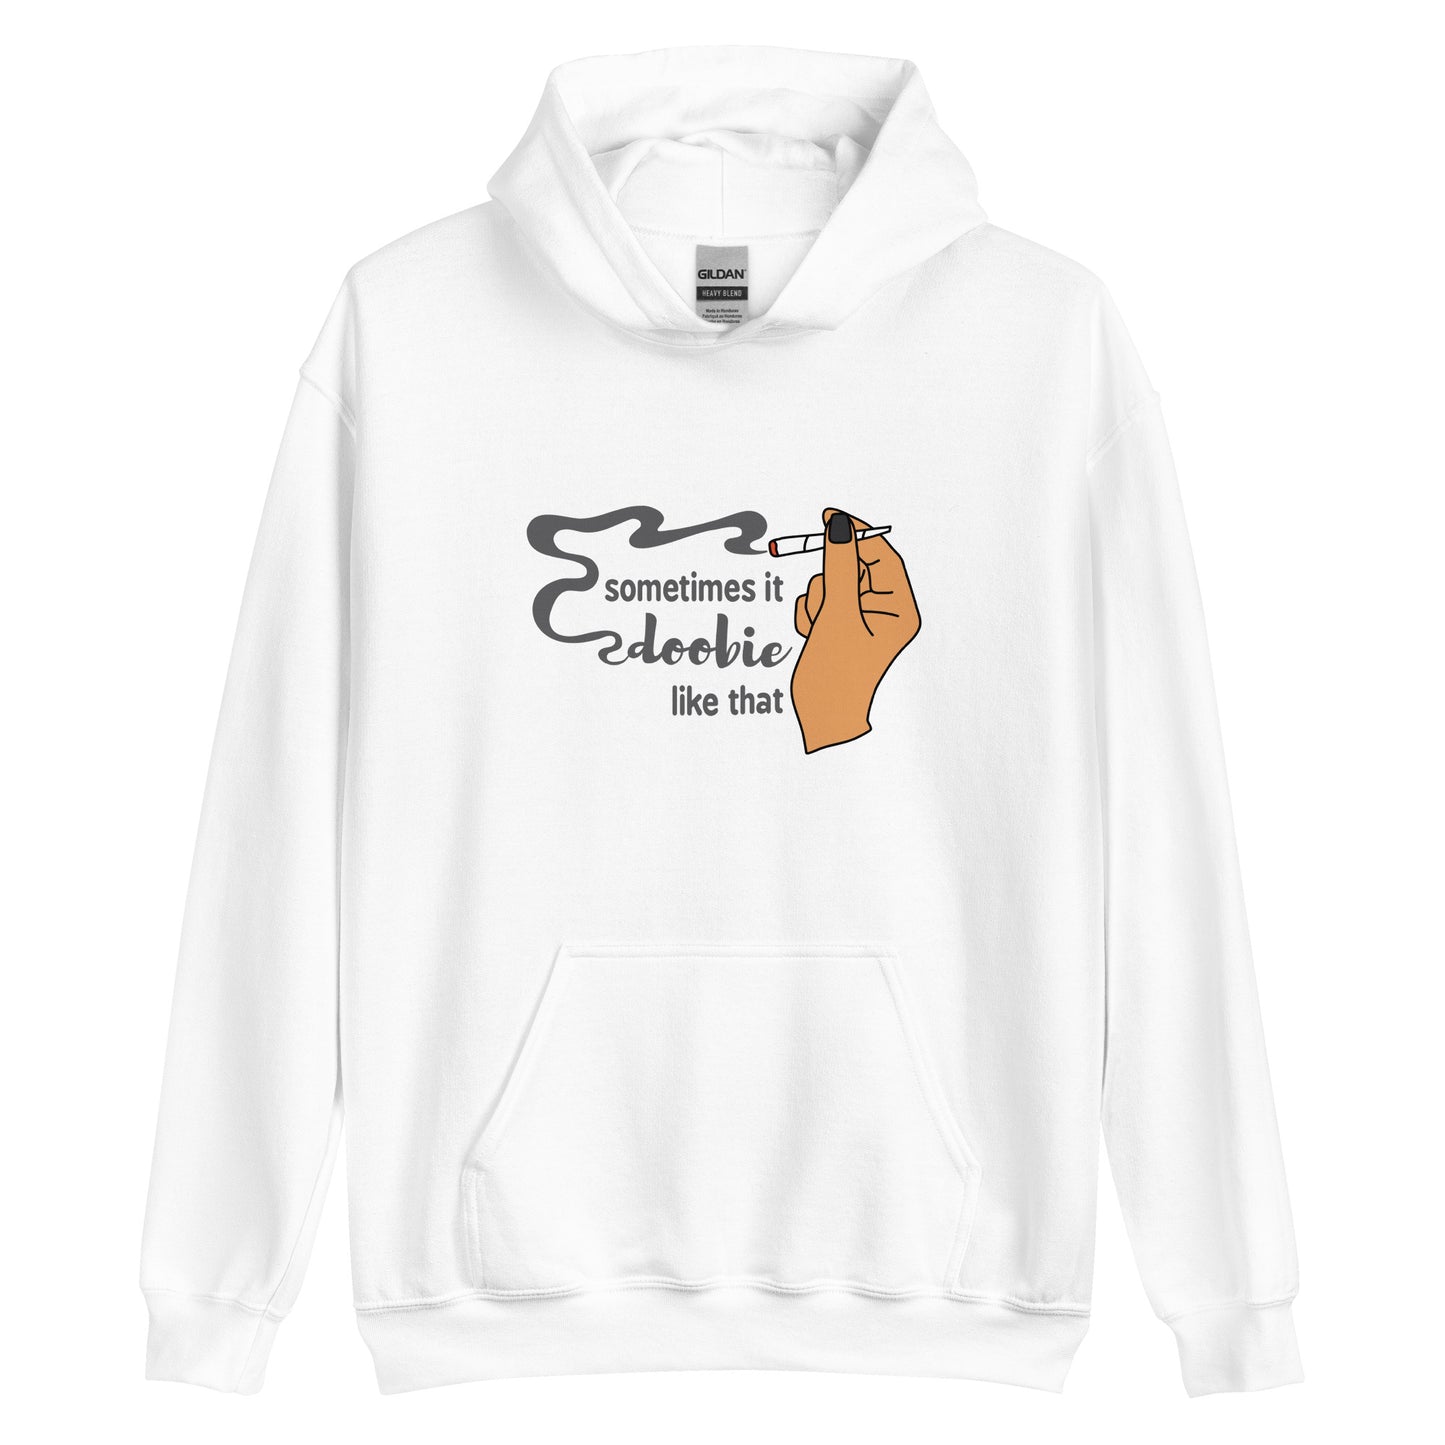 A white hooded sweatshirt featuring an illustration of a hand holding a smoking joint. Text alongside the hand reads "Sometimes it doobie like that" with the word "doobie" made of smoke from the joint.